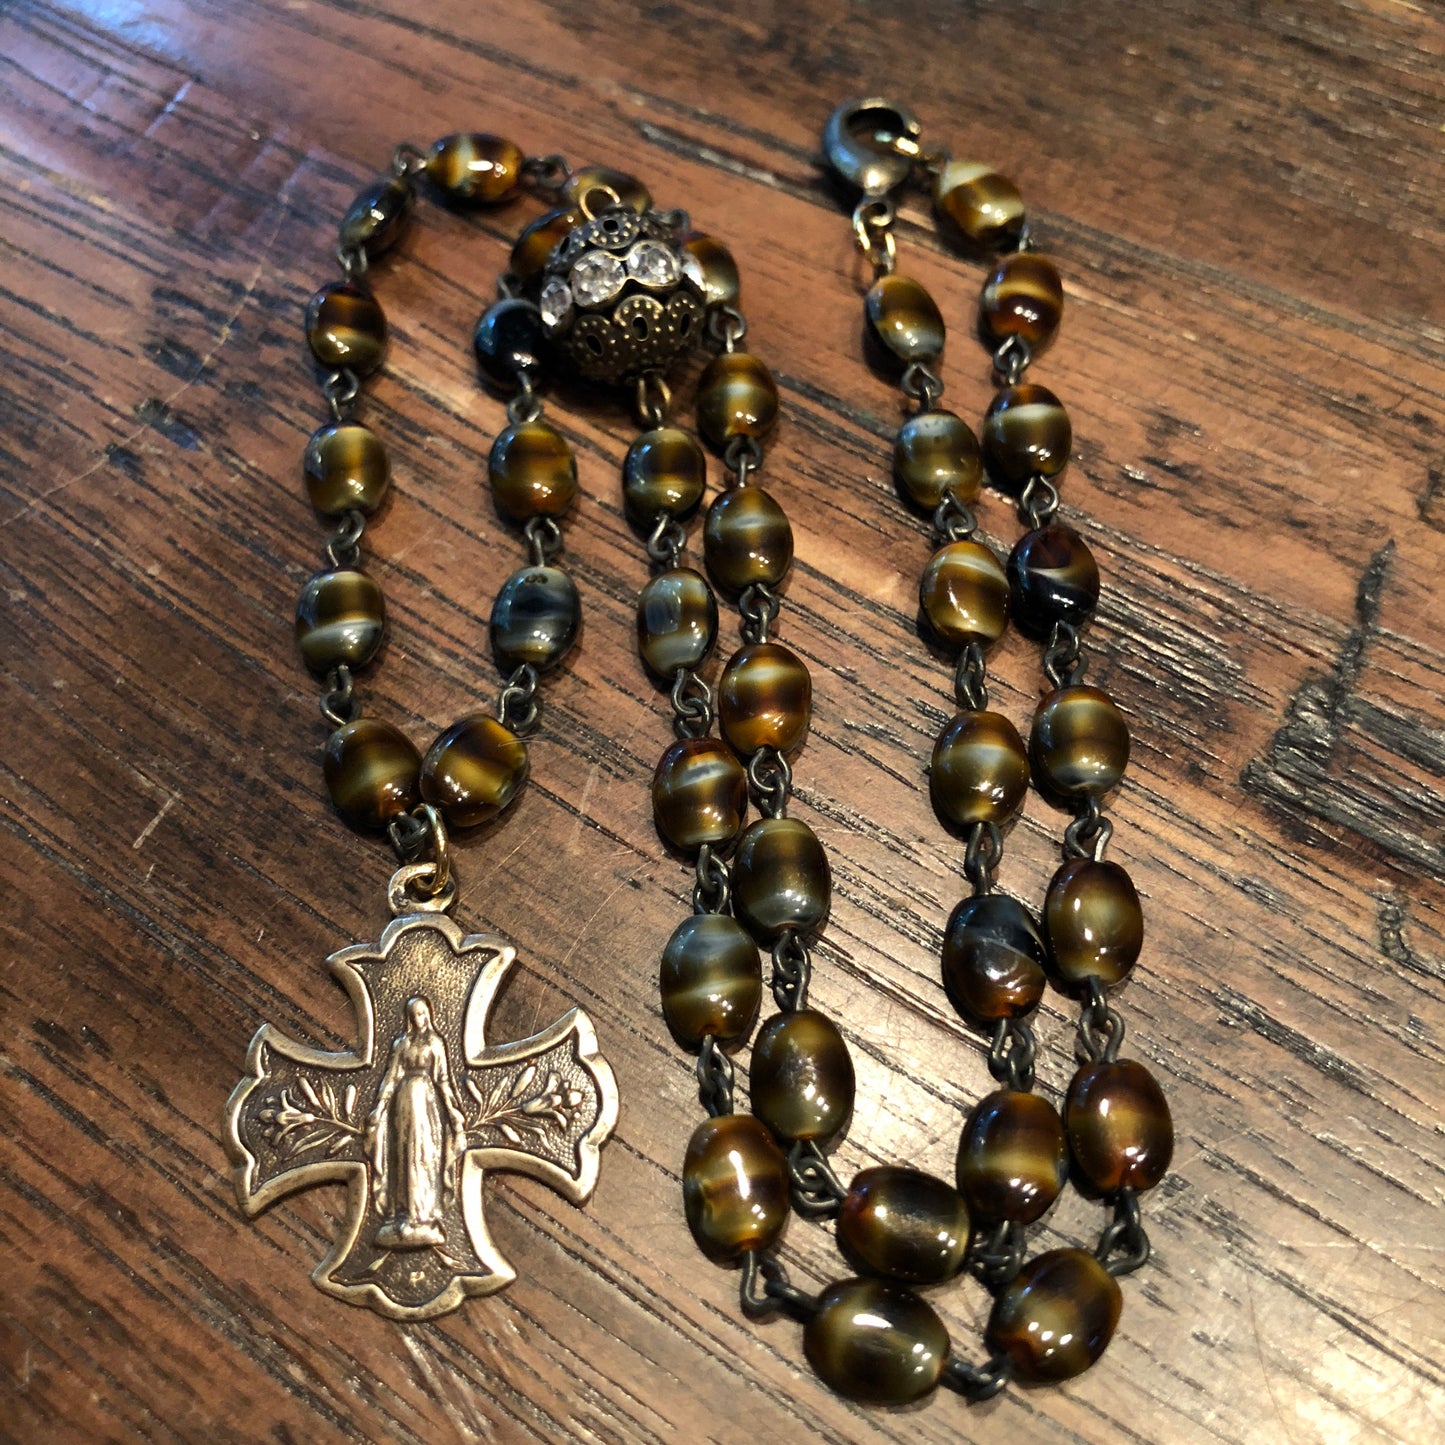 Our Lady’s Protection Necklace